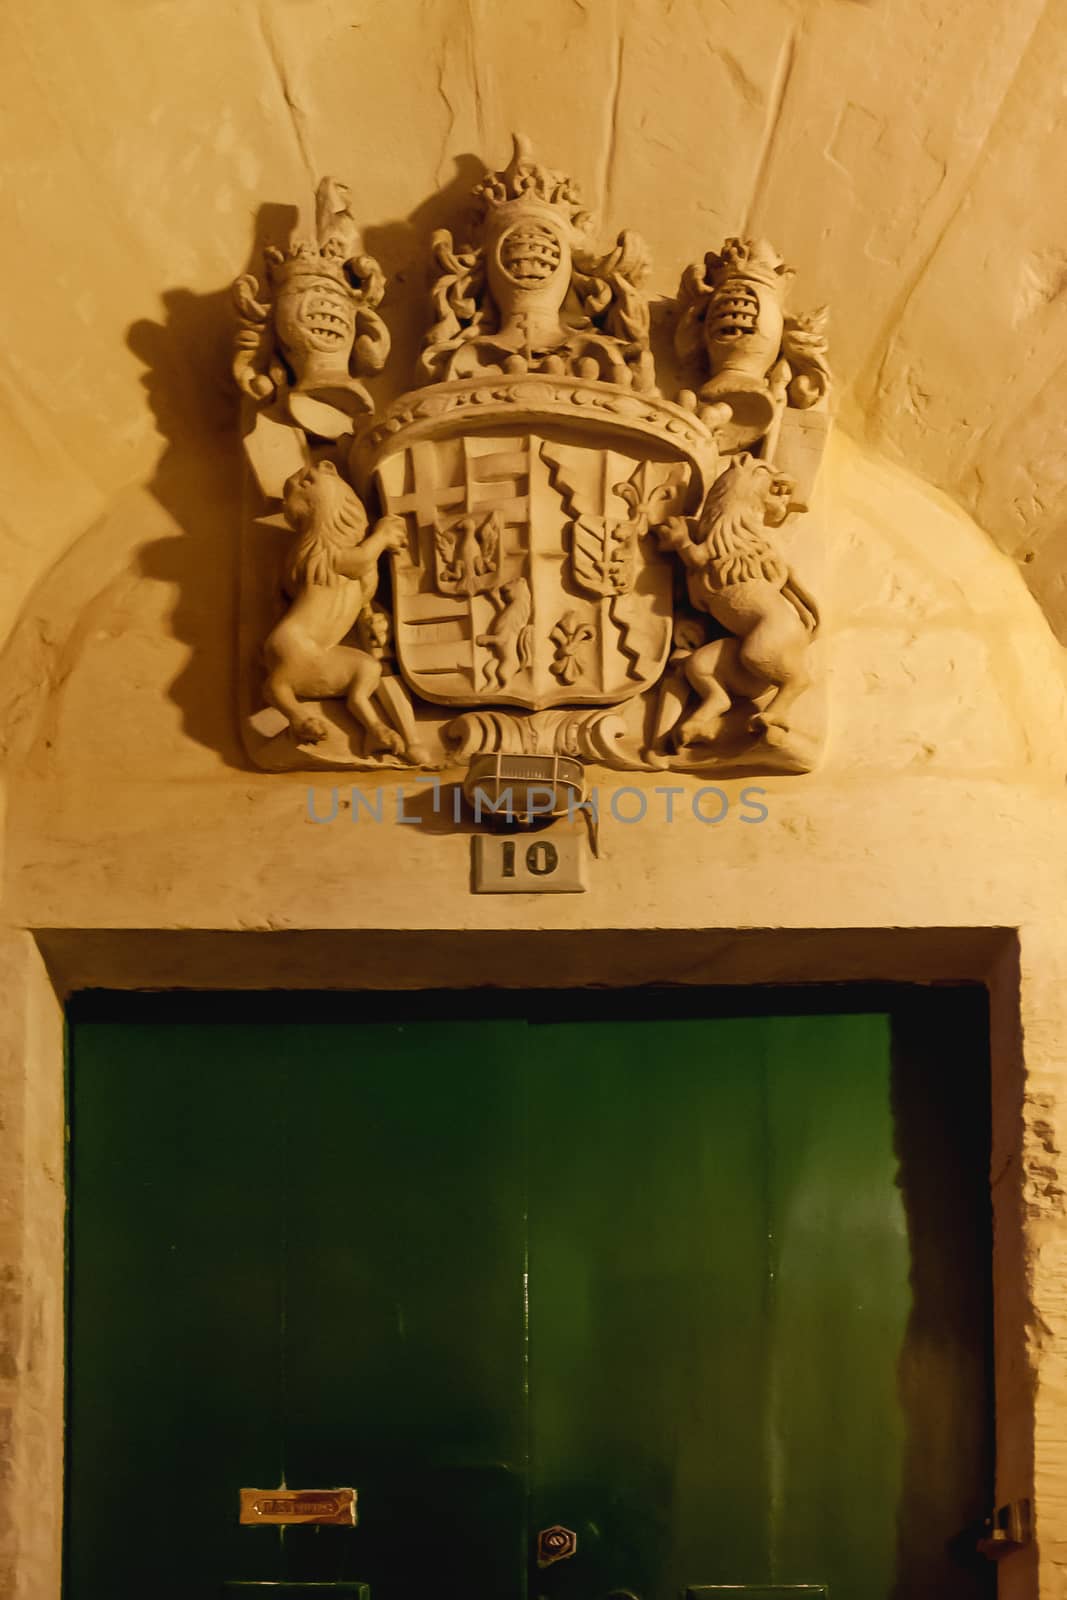 Illuminated coat of arms with heraldic lion. Architectural detail over entrance door. Mdina, ancient capital of Malta. by aksenovko